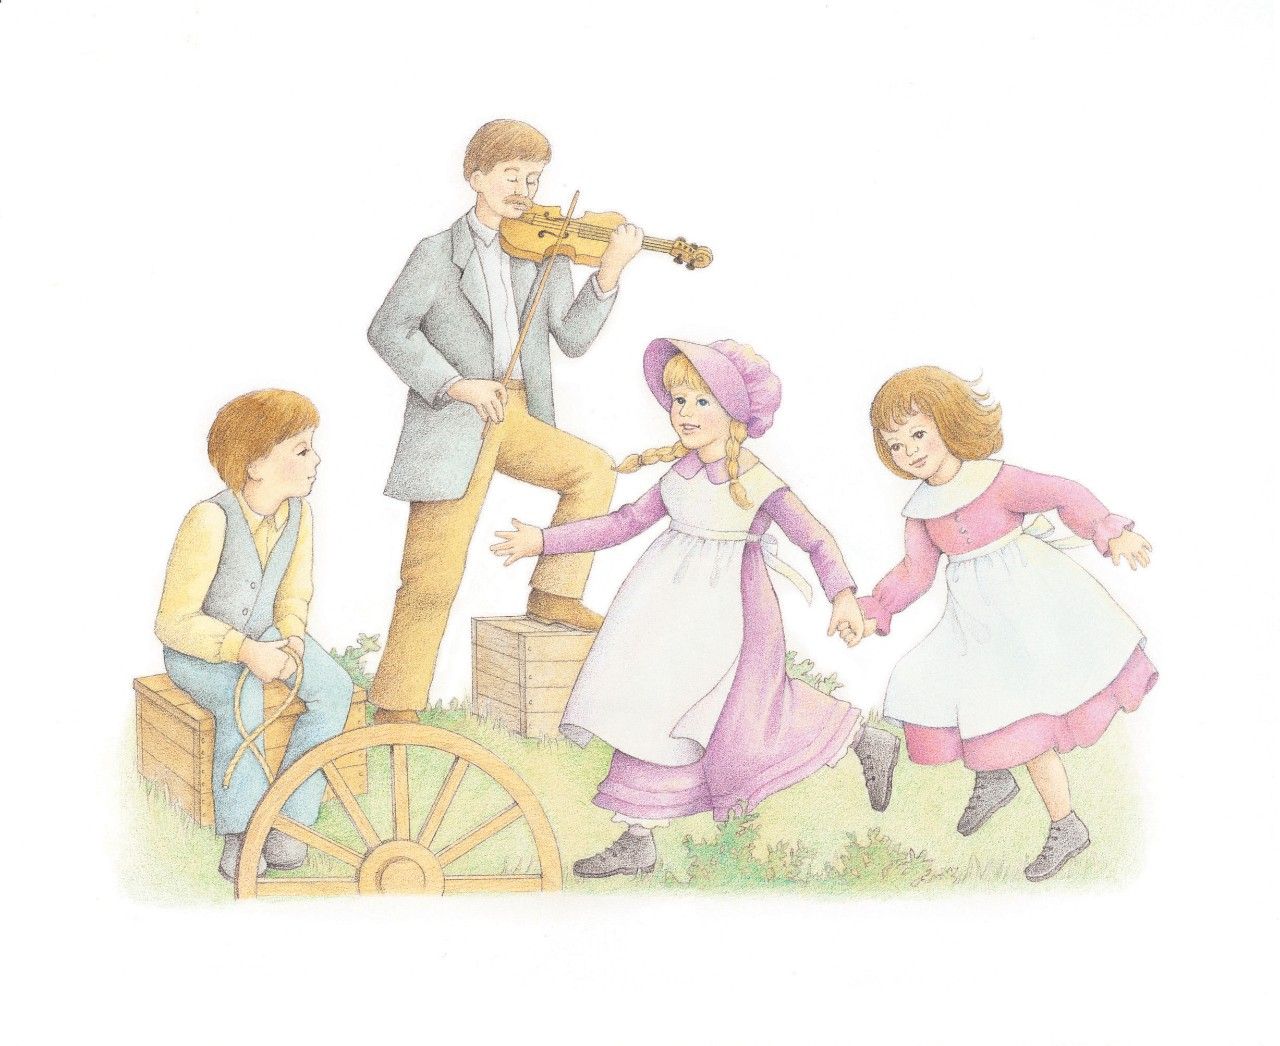 Pioneer children dance to the tune of a nearby fiddler. From the Children’s Songbook, page 223, “Whenever I Think about Pioneers”; watercolor illustration by Beth Whittaker.